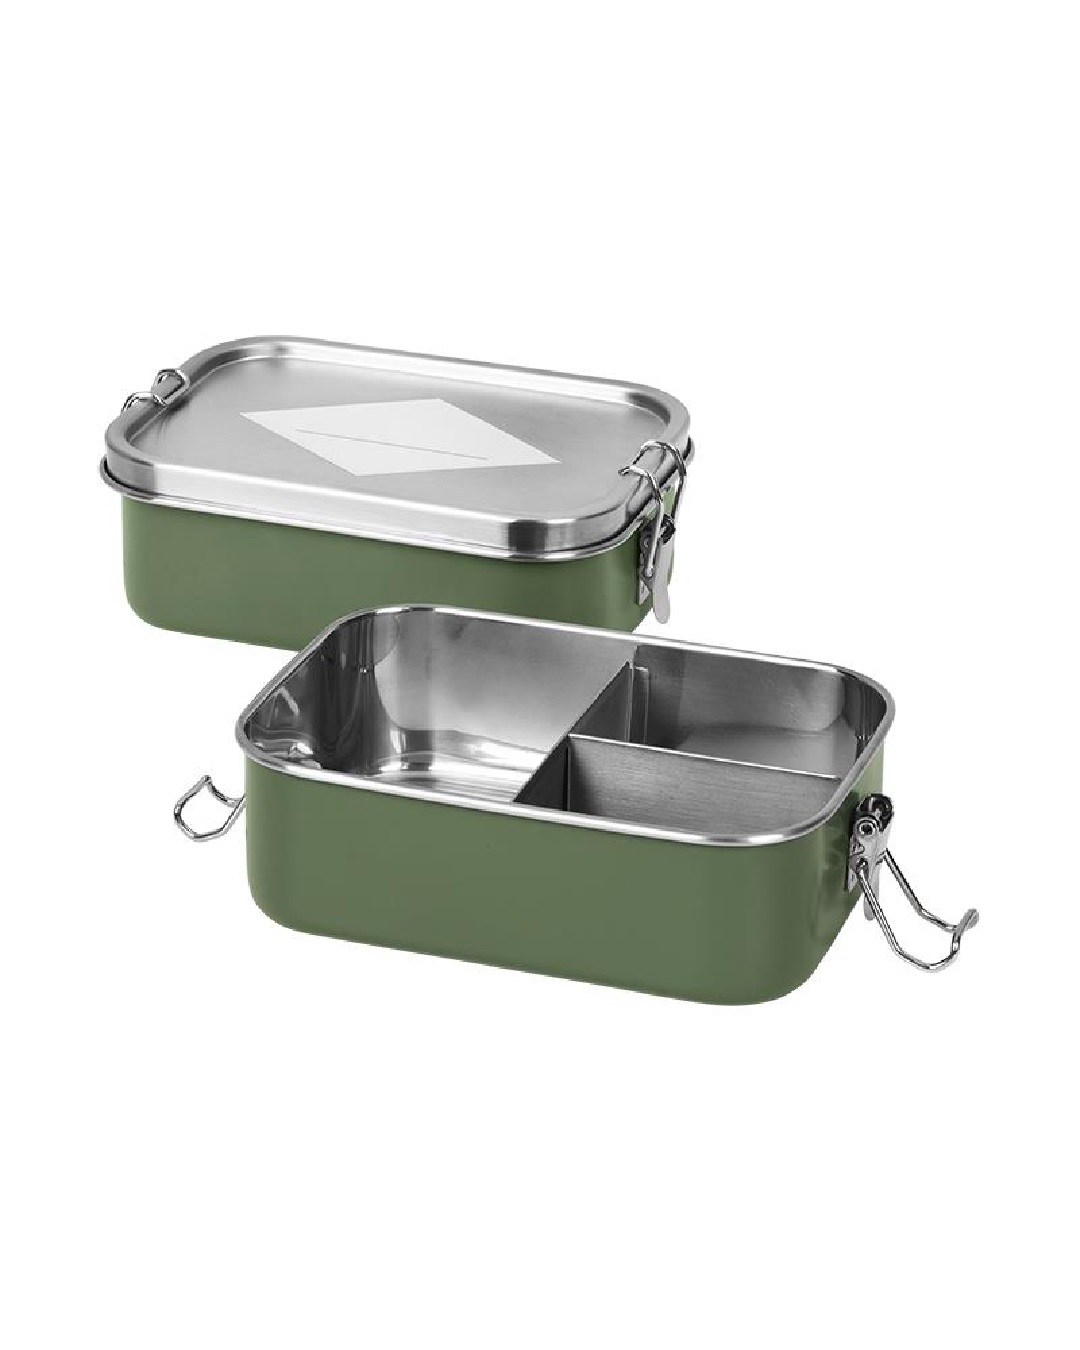 Olive stainless steel lunchbox